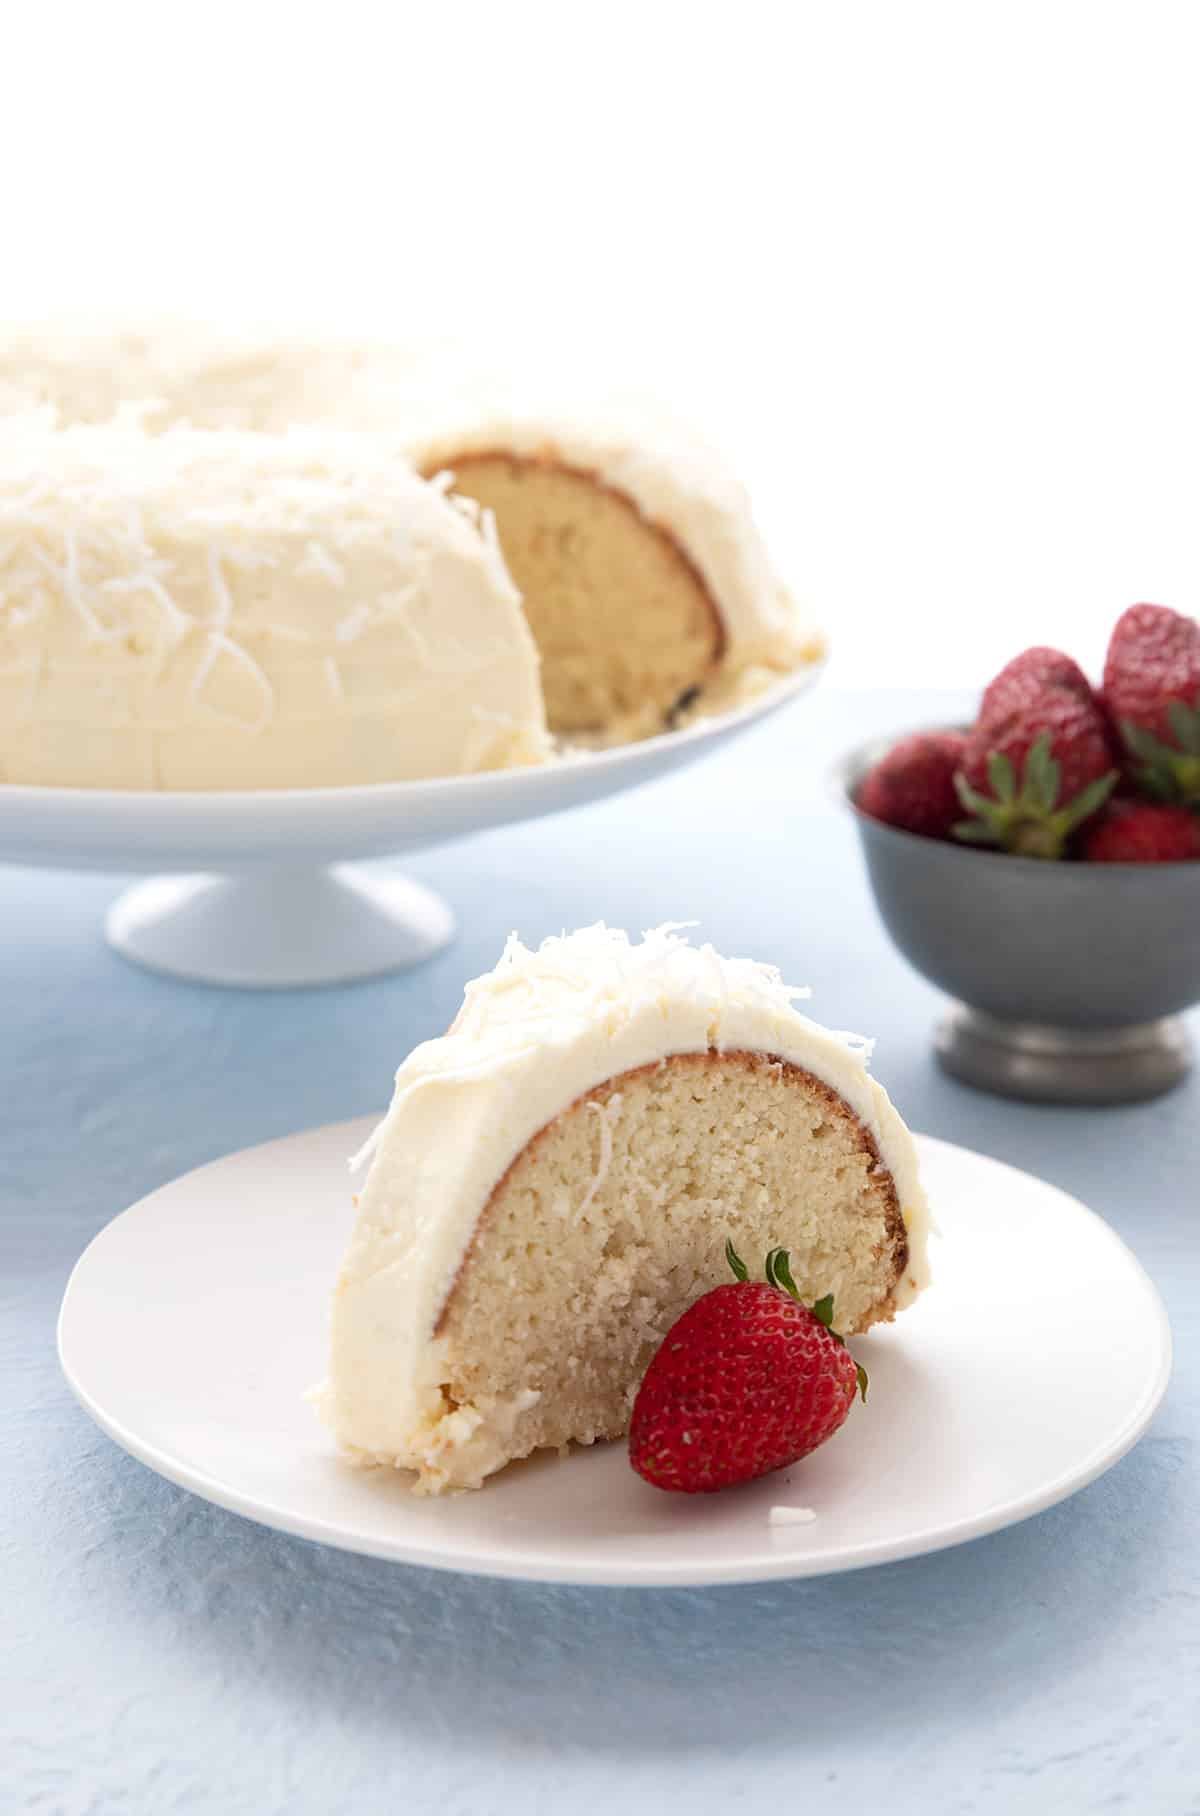 A slice of keto coconut cake on a white plate with a bowl of strawberries and the rest of the cake in the background.